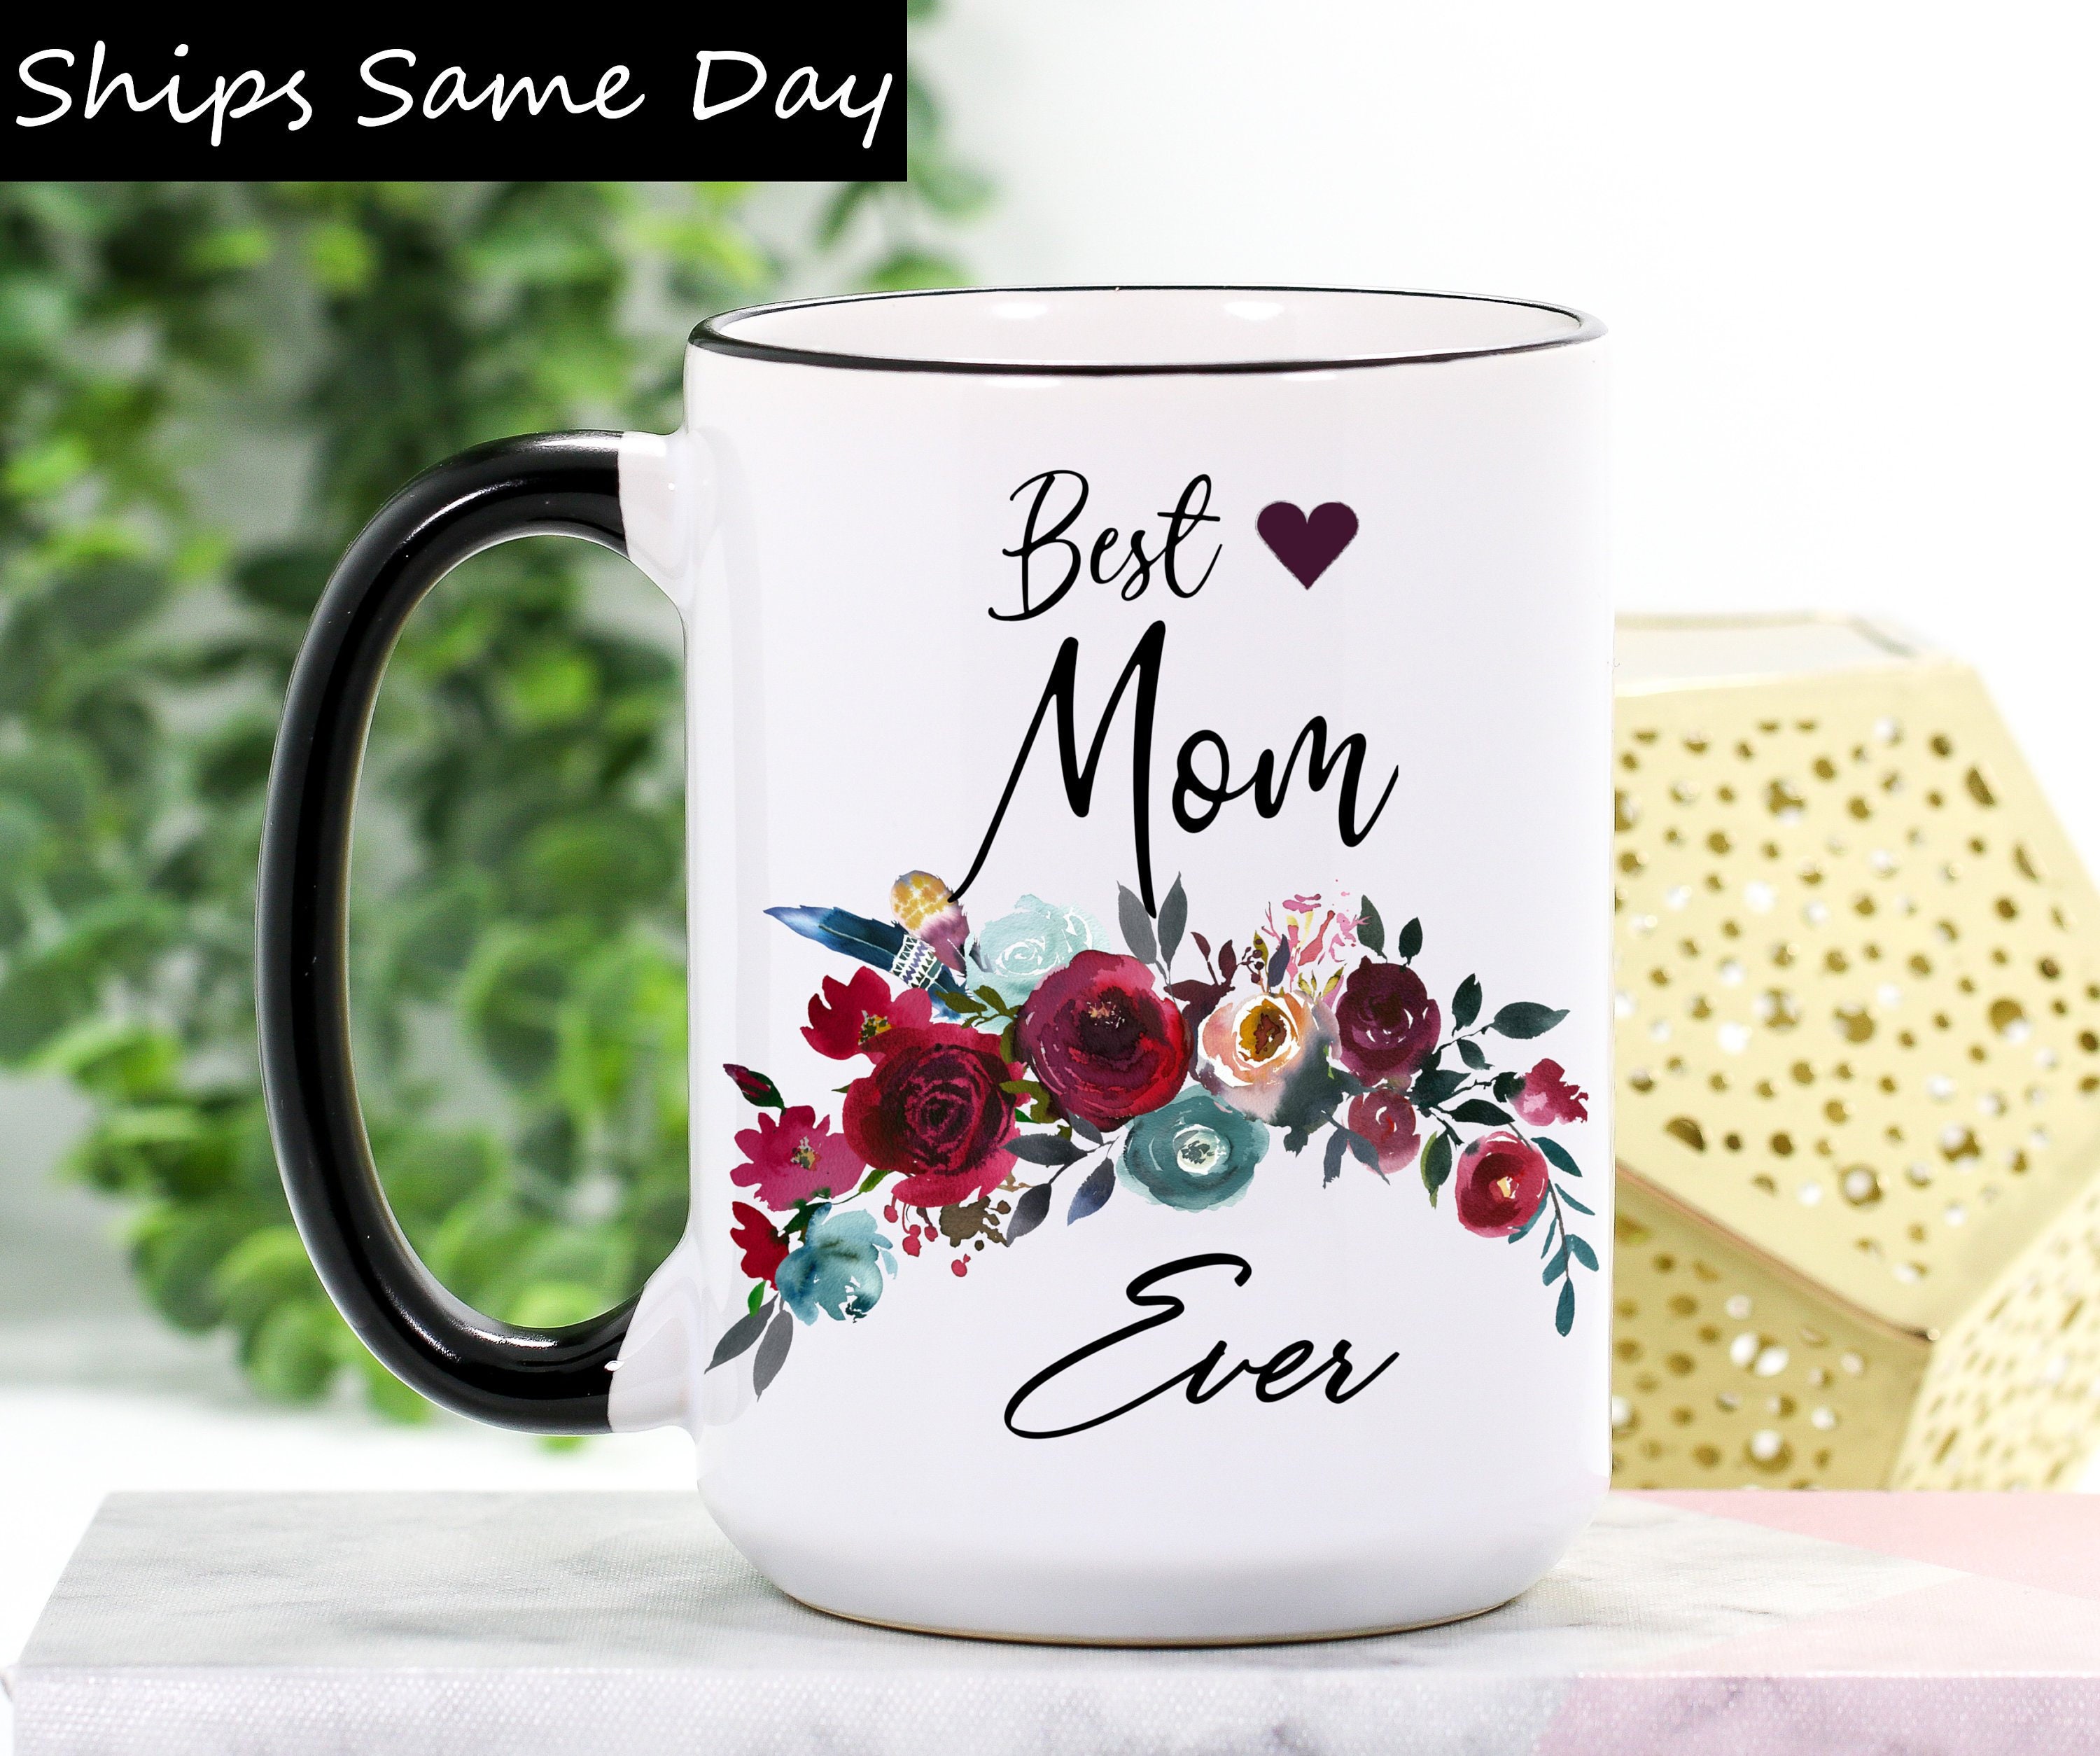 Best Mom Ever Coffee Mug Mother's Day Gift Gift For Mom Her Ceramic Coffee Cup